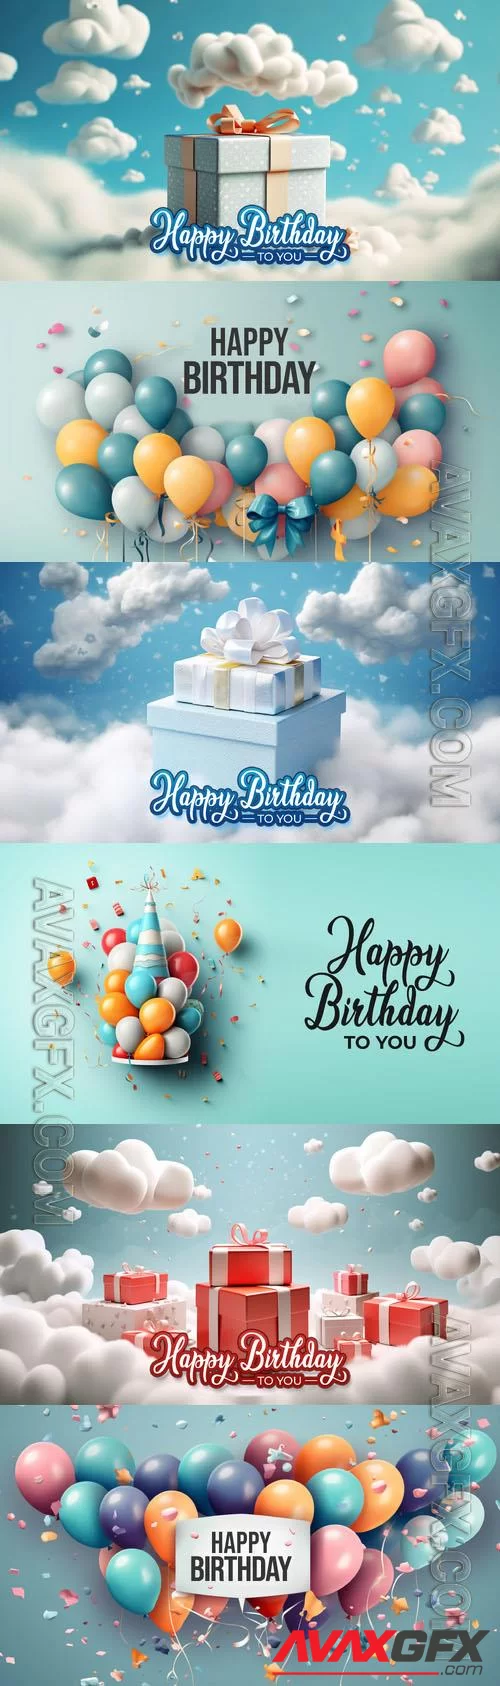 Happy birthday psd backgrounds with gift boxes and balloons